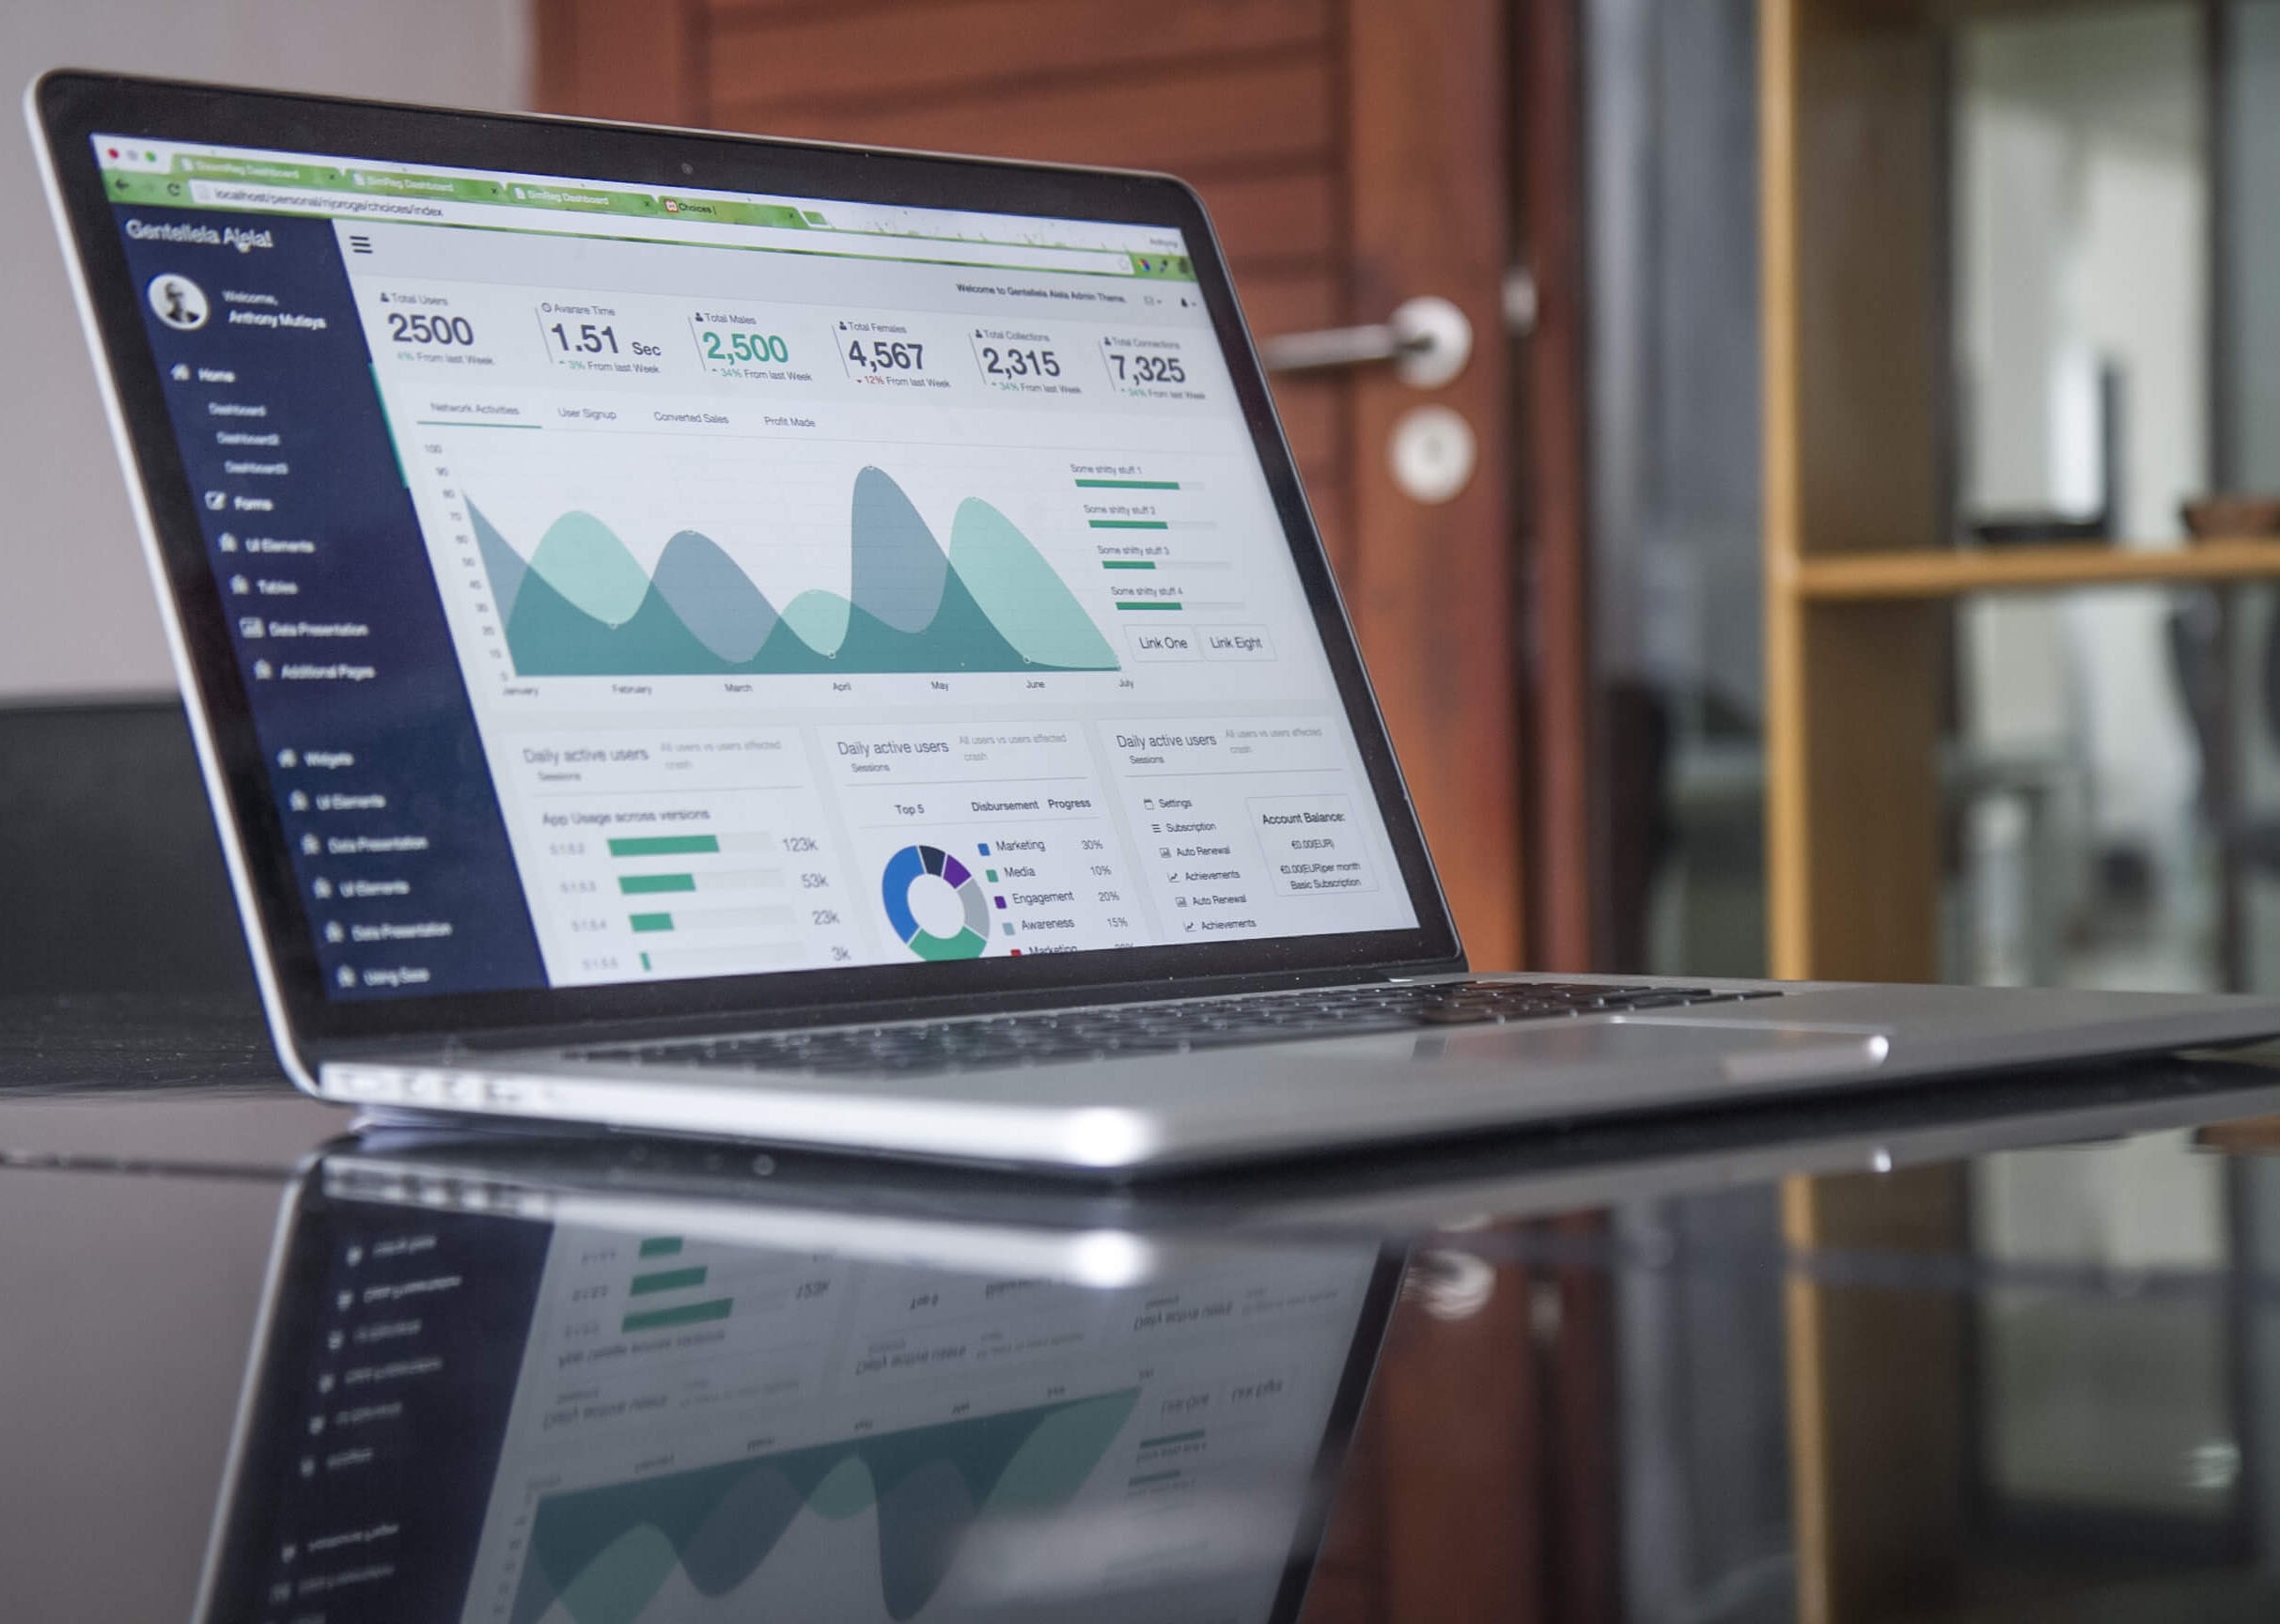 Utilizing SEO tools and tracking KPI's and data streams to optimize your digital marketing strategy is key as you go forward with your Digital Transformation.